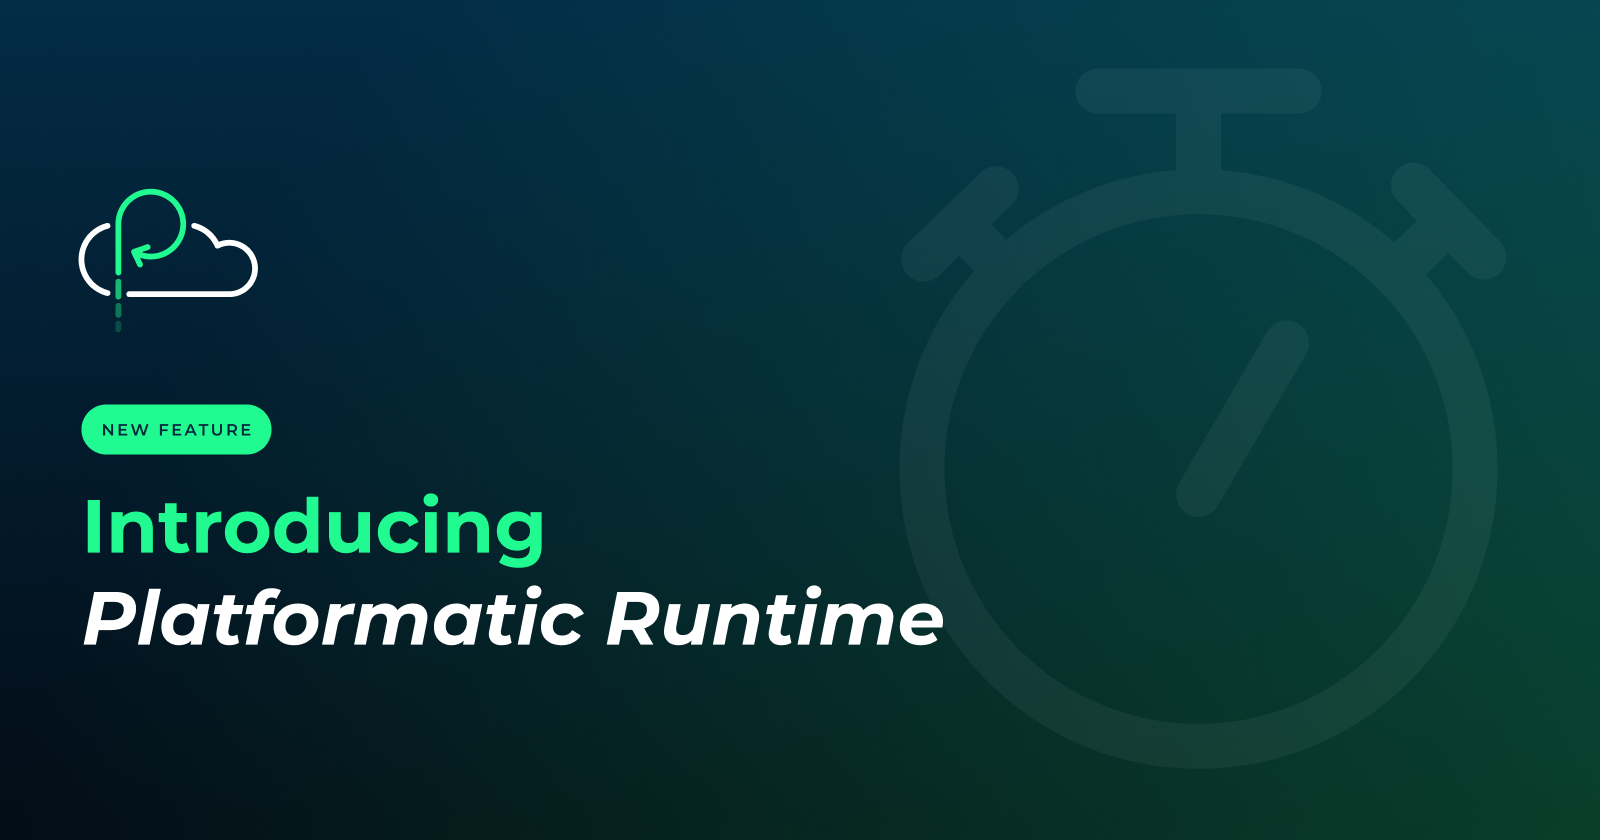 New Feature - Platformatic Runtime (1600x840px)